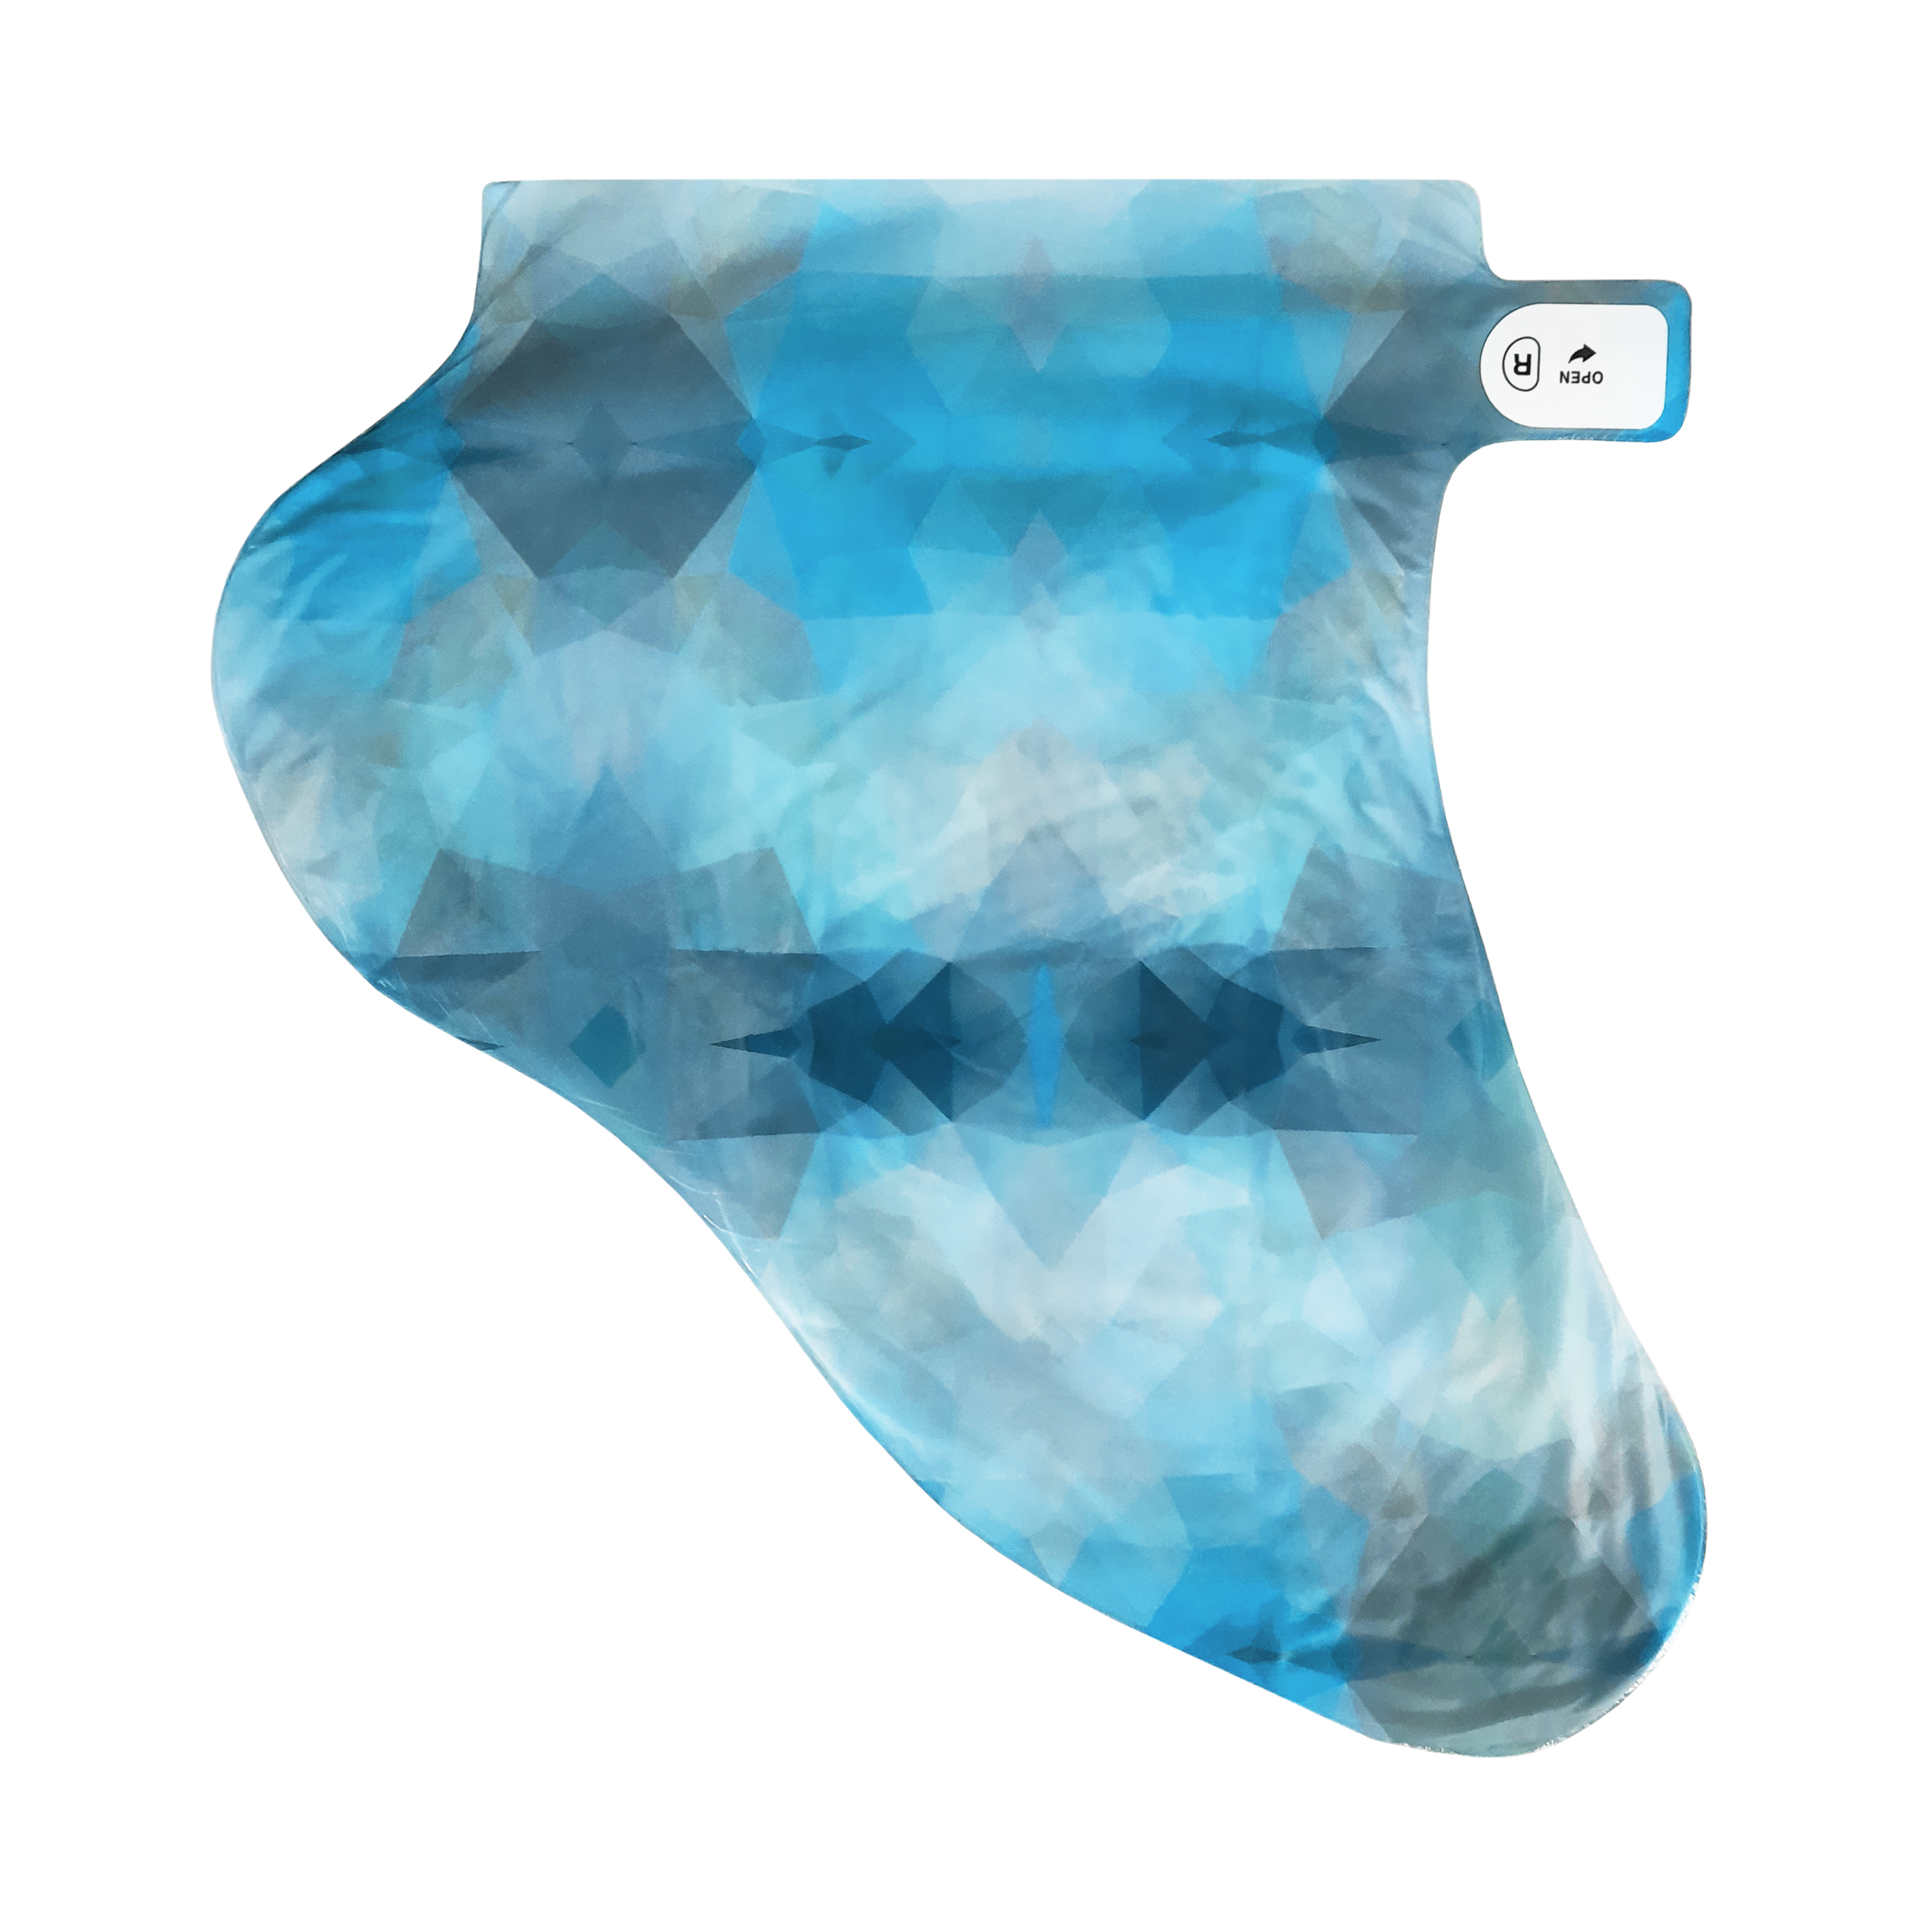 Cold Foot Mask